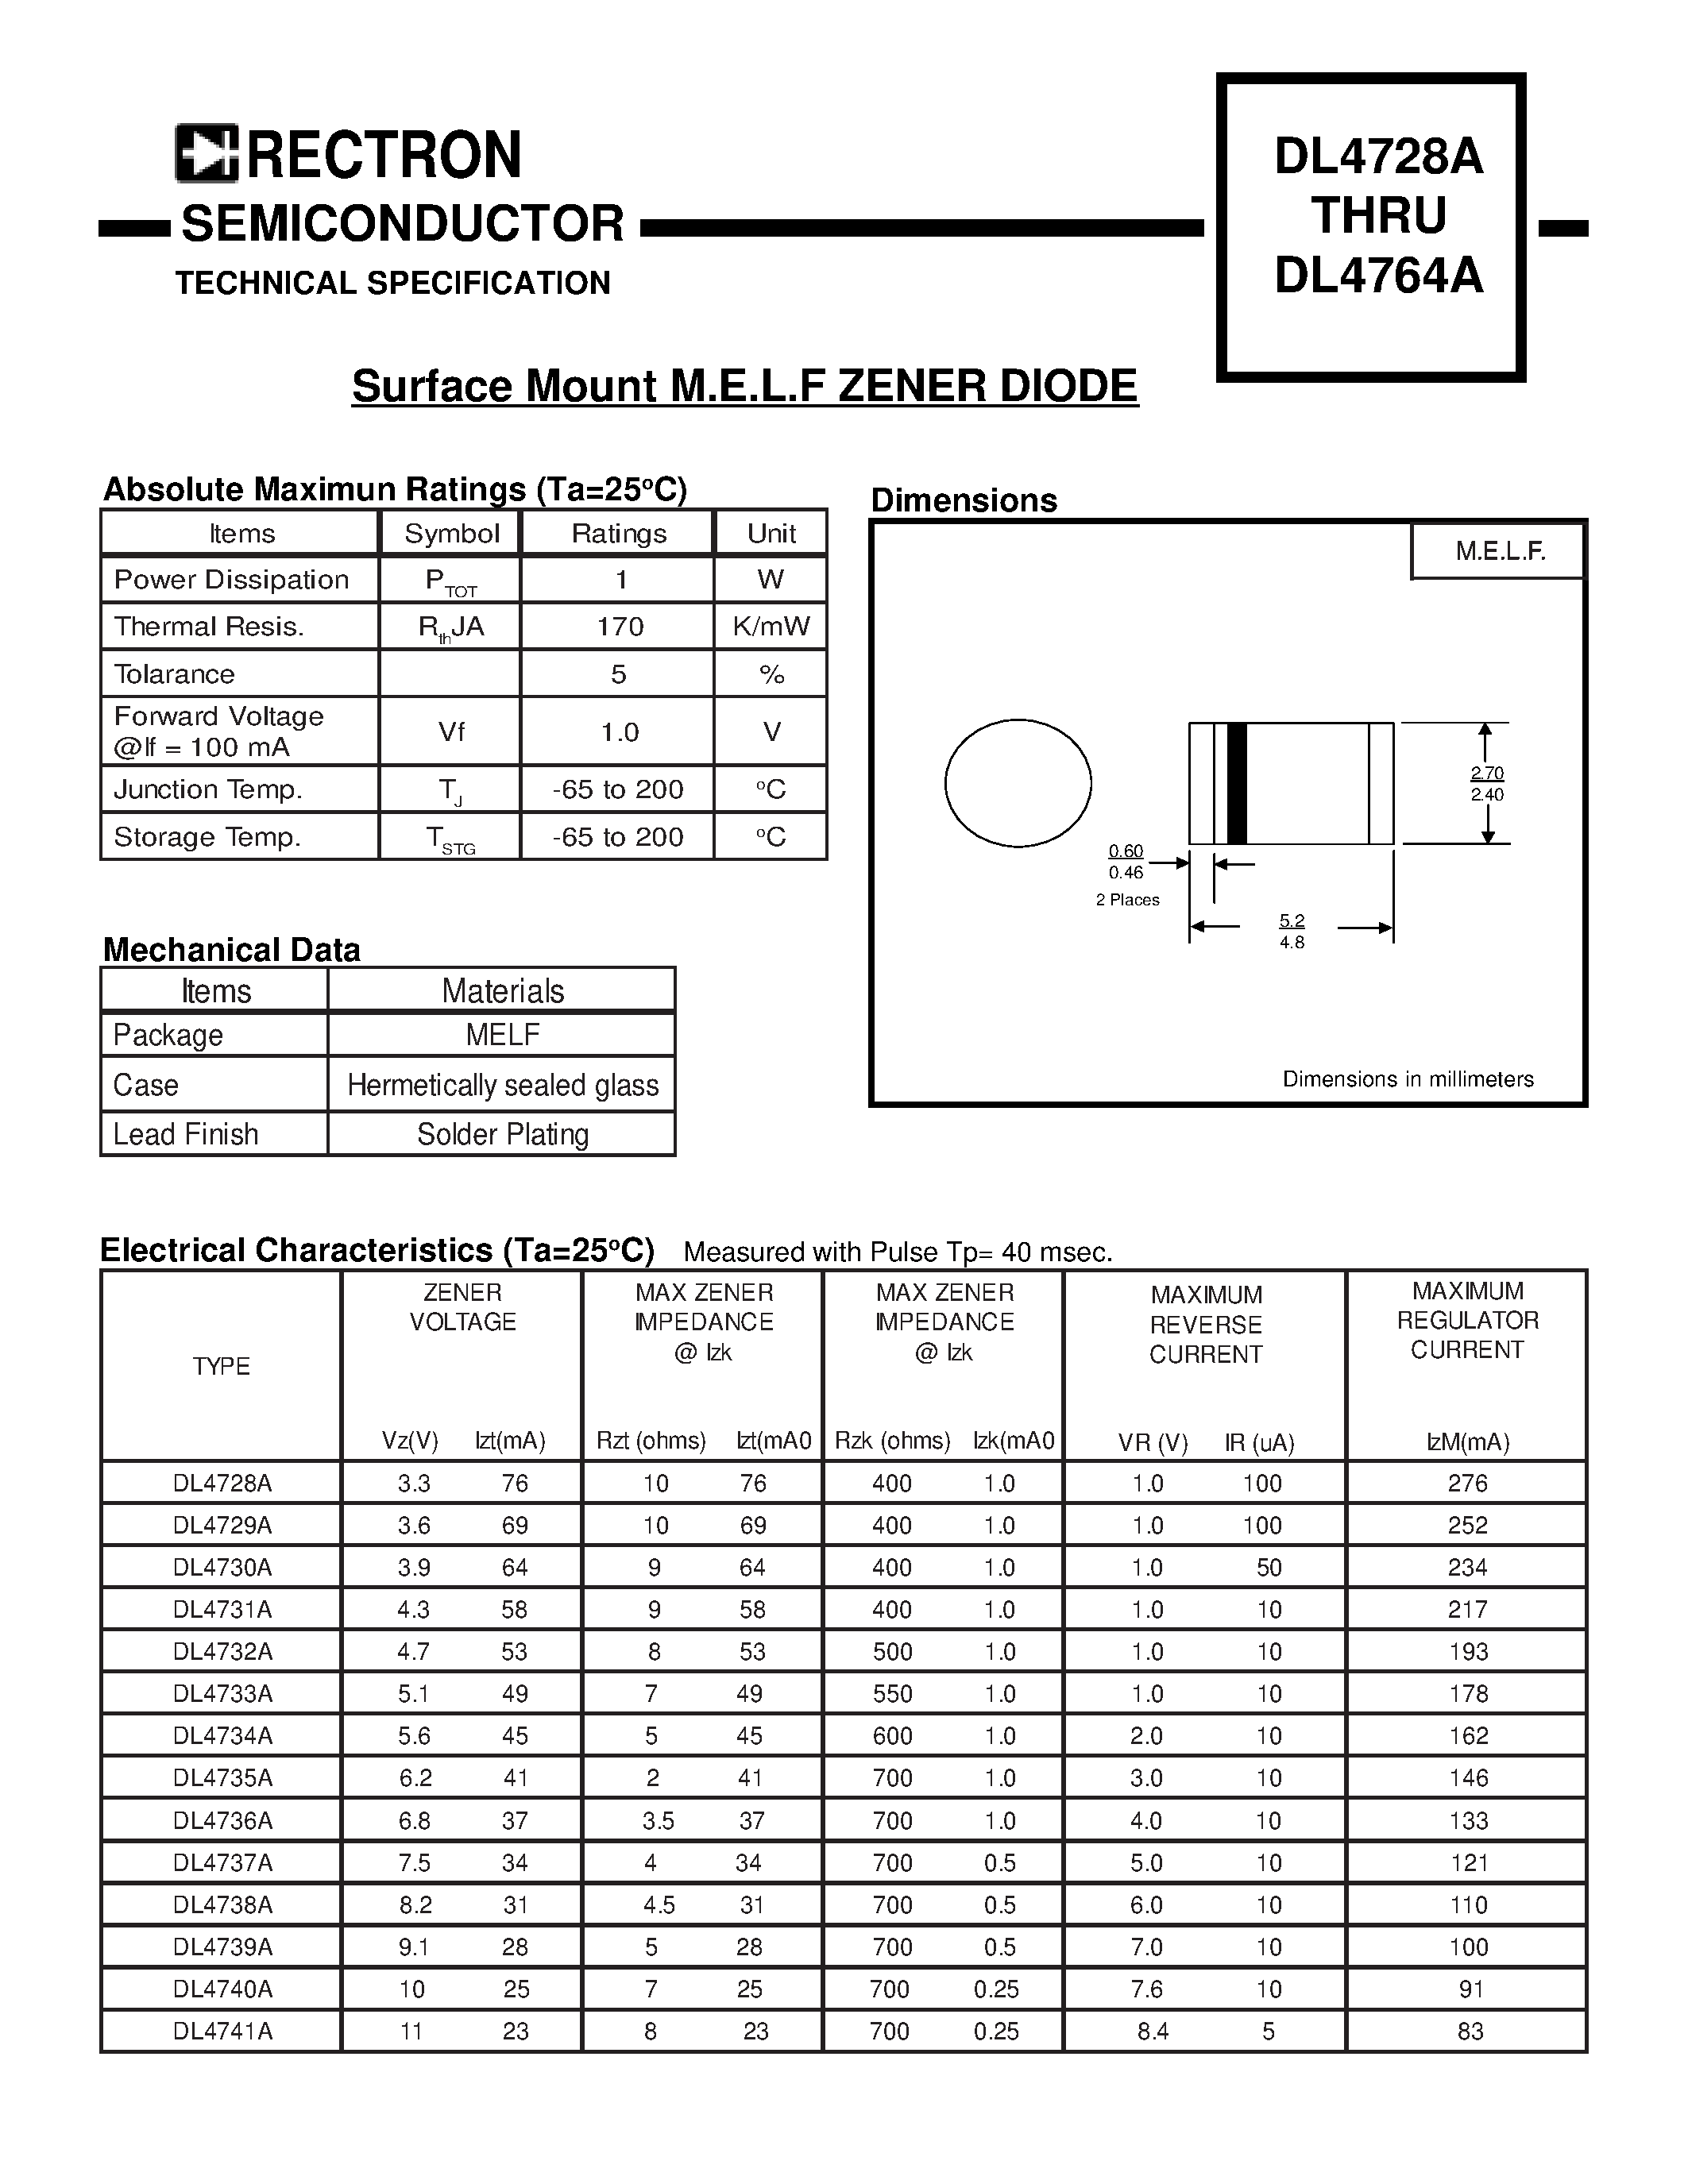 Datasheet DL4740A - Surface Mount M.E.L.F ZENER DIODE page 1